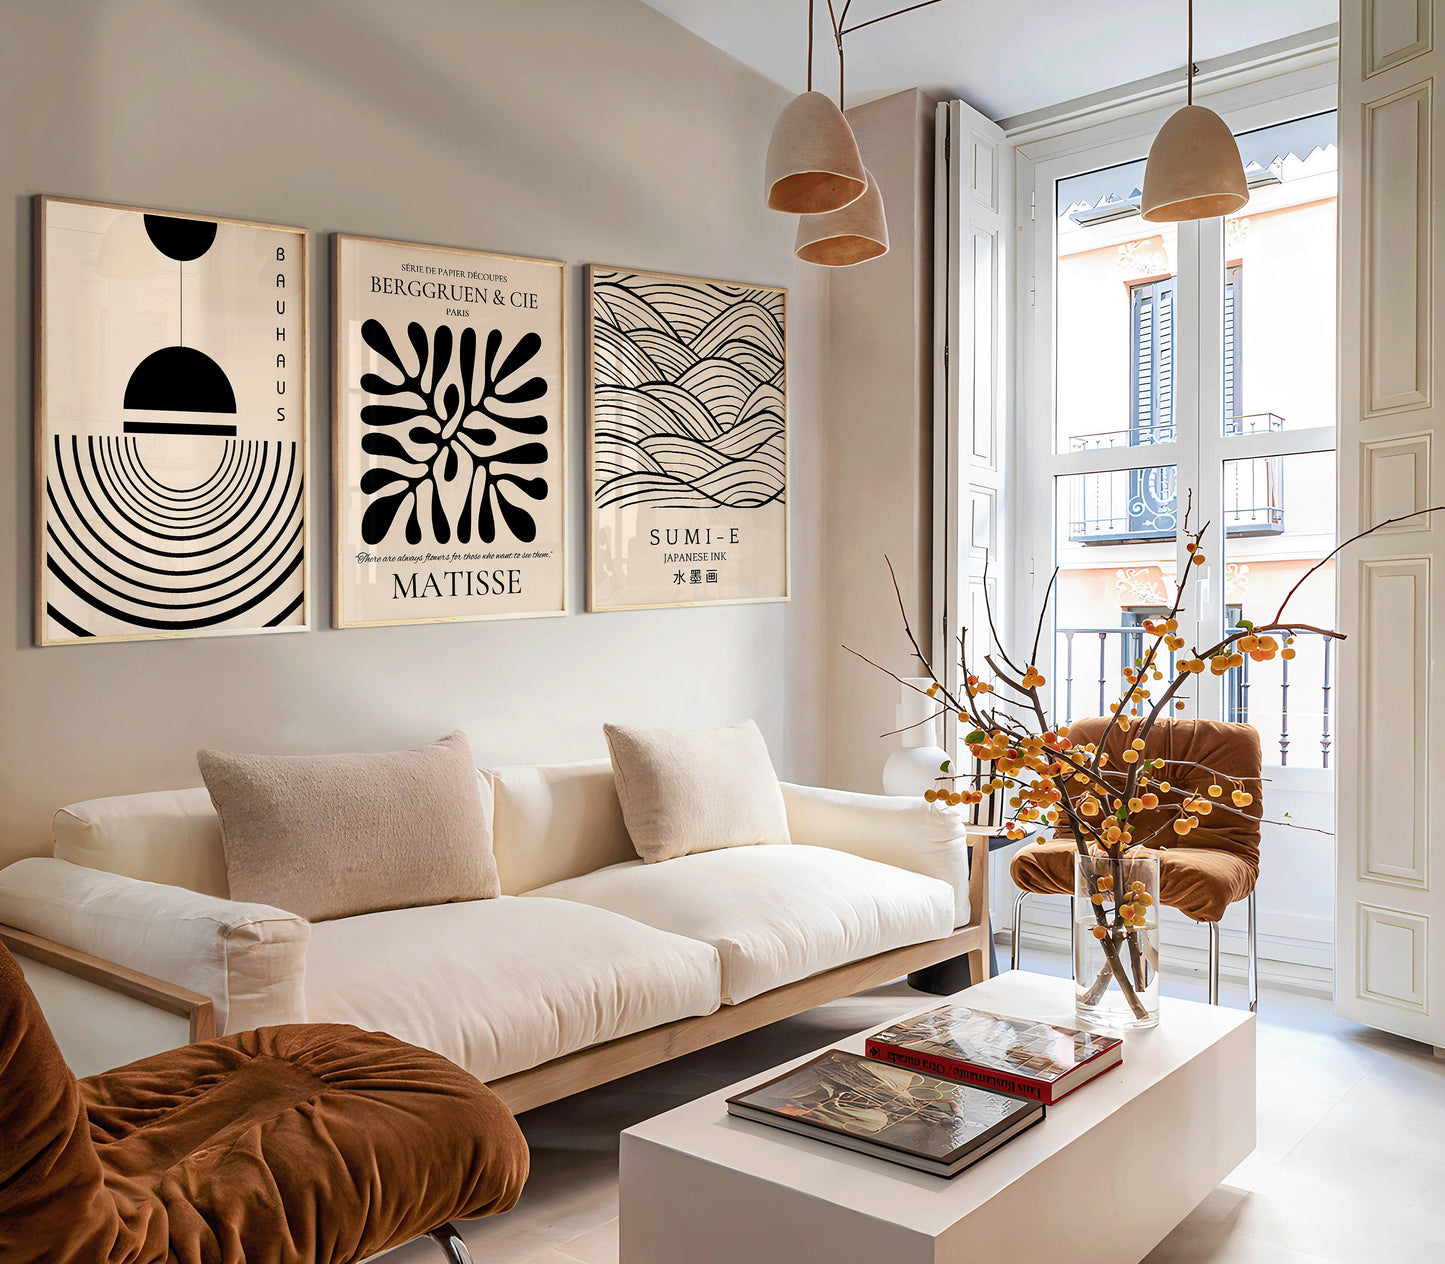 Matisse Bauhaus Set of 3 poster prints Japanese Ink Sumi-E Abstract Modern Art Print Vintage Abstract Above Bed Framed Wall Art Beige Shape Copy